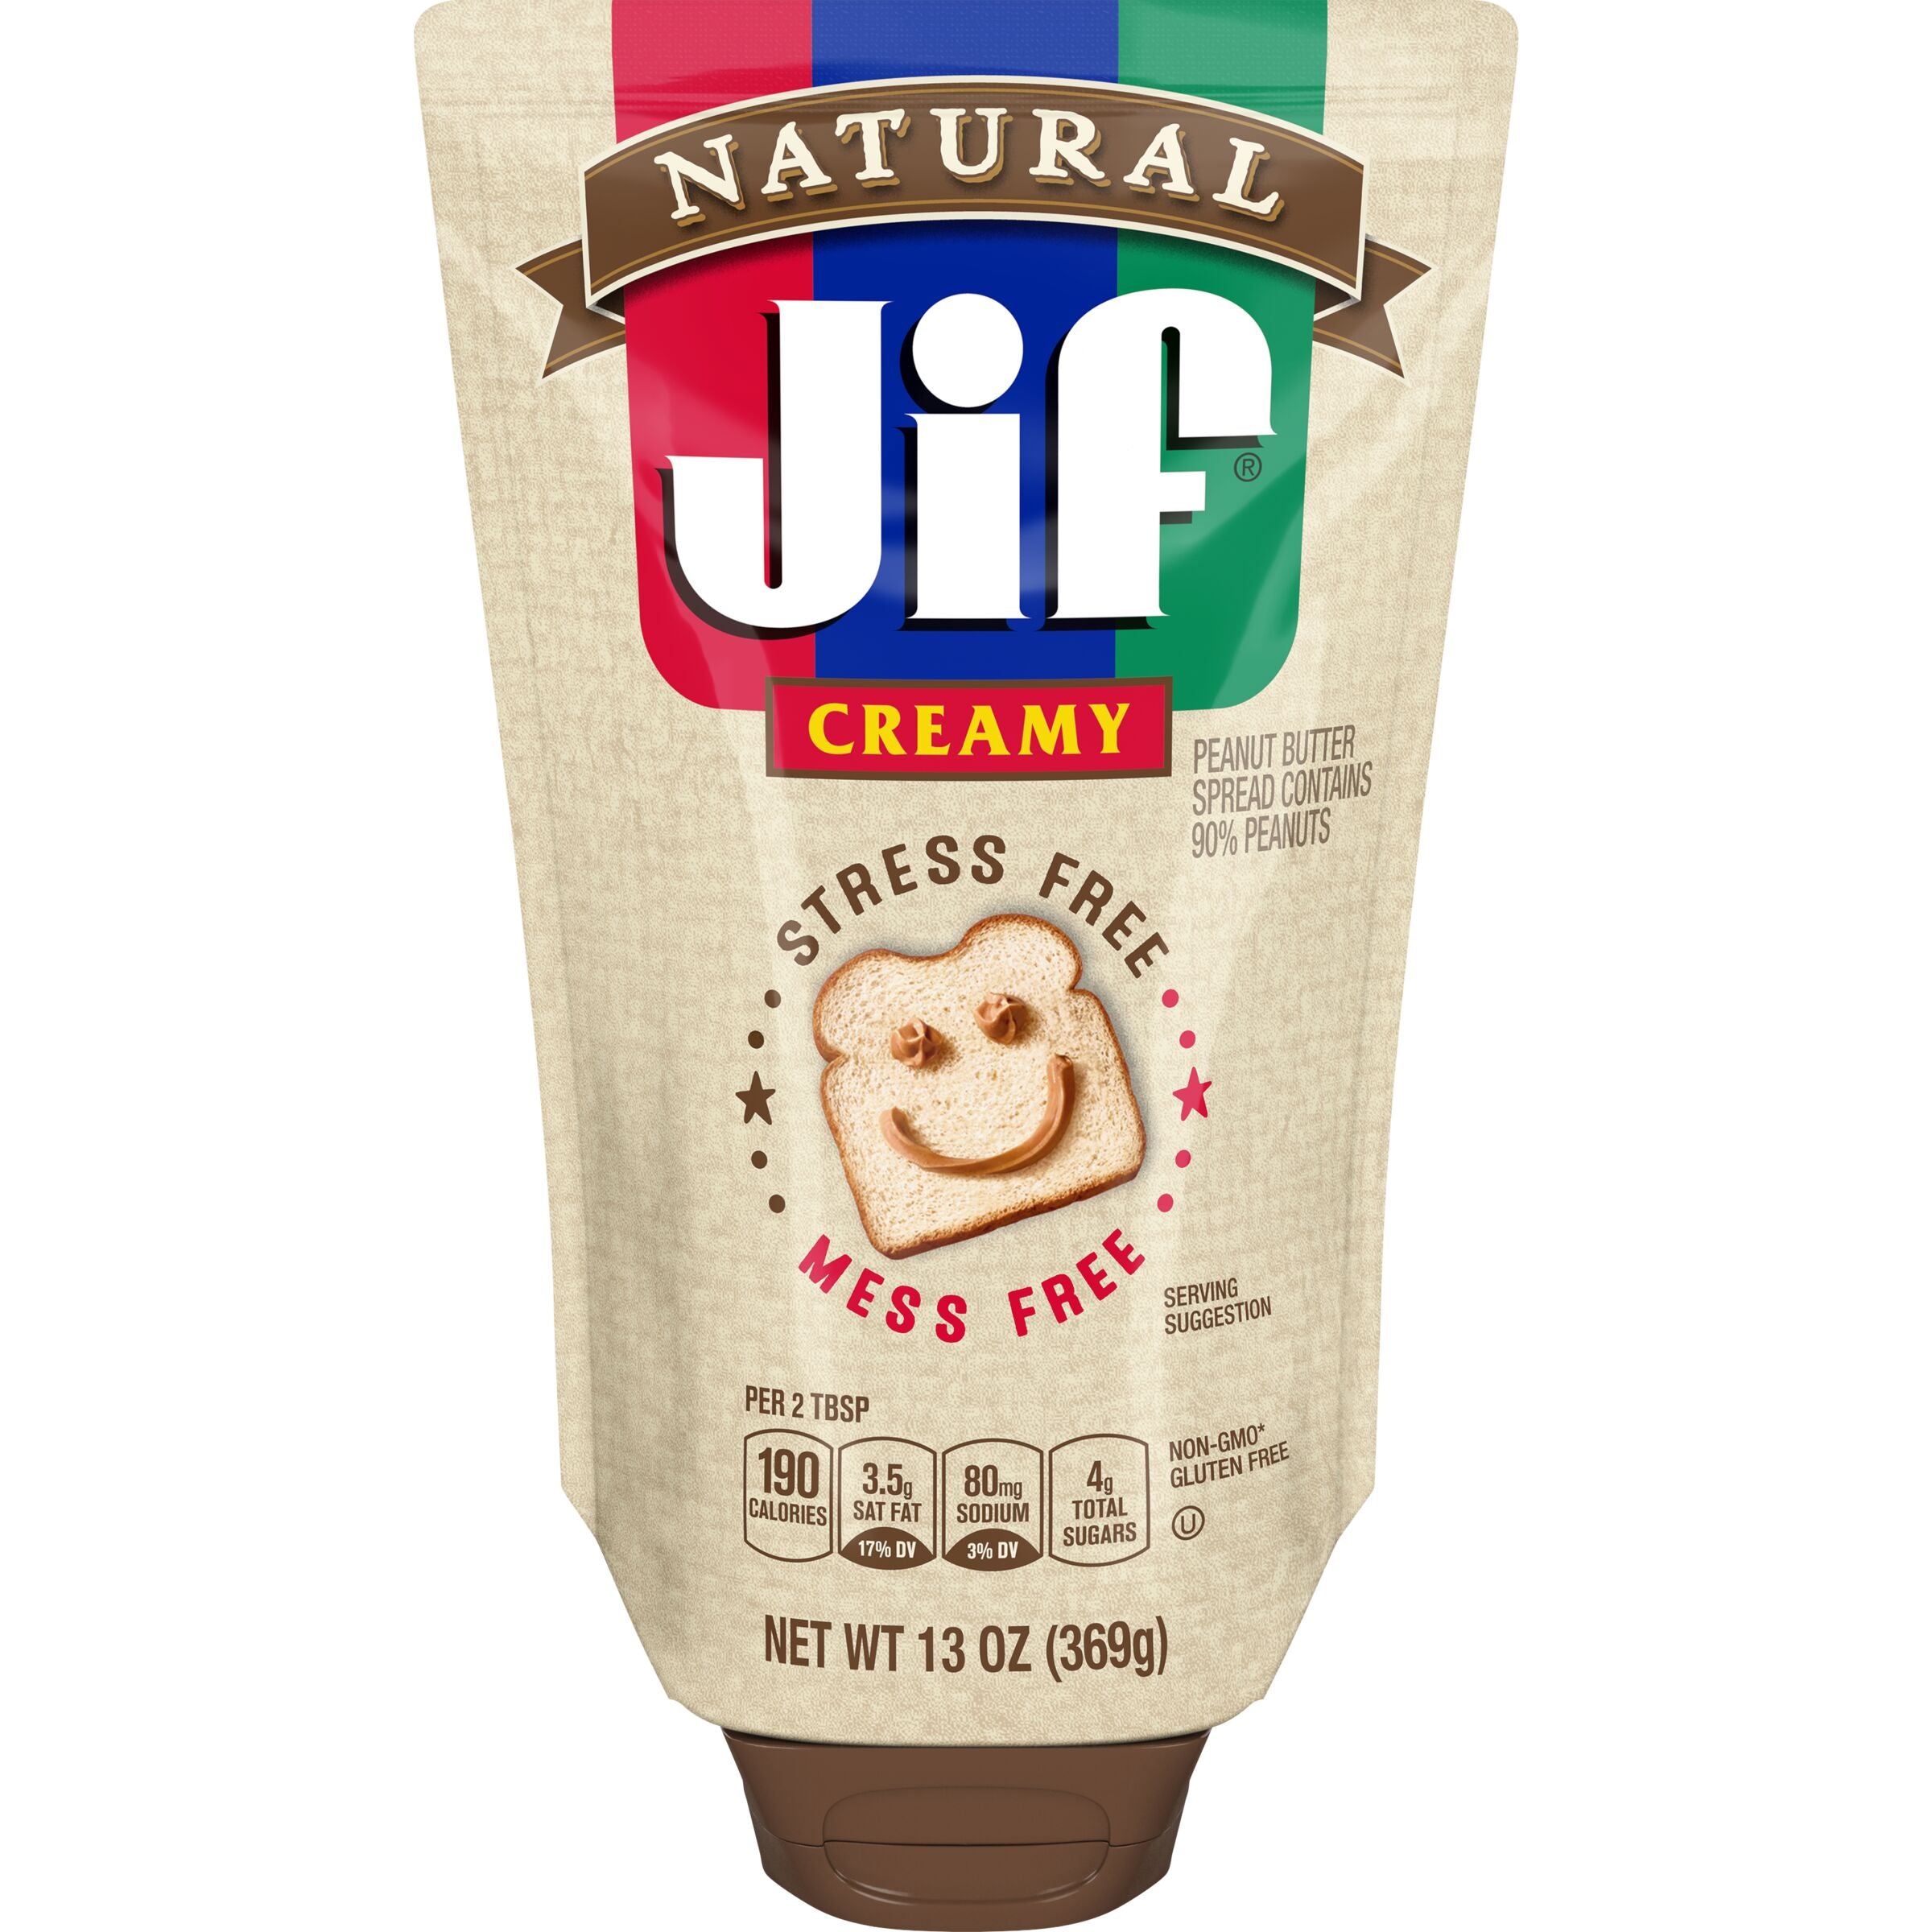 Jif Natural Creamy Peanut Butter, 18 g Plastic Portion Control Cup, 120  Count Case : Smucker Away From Home